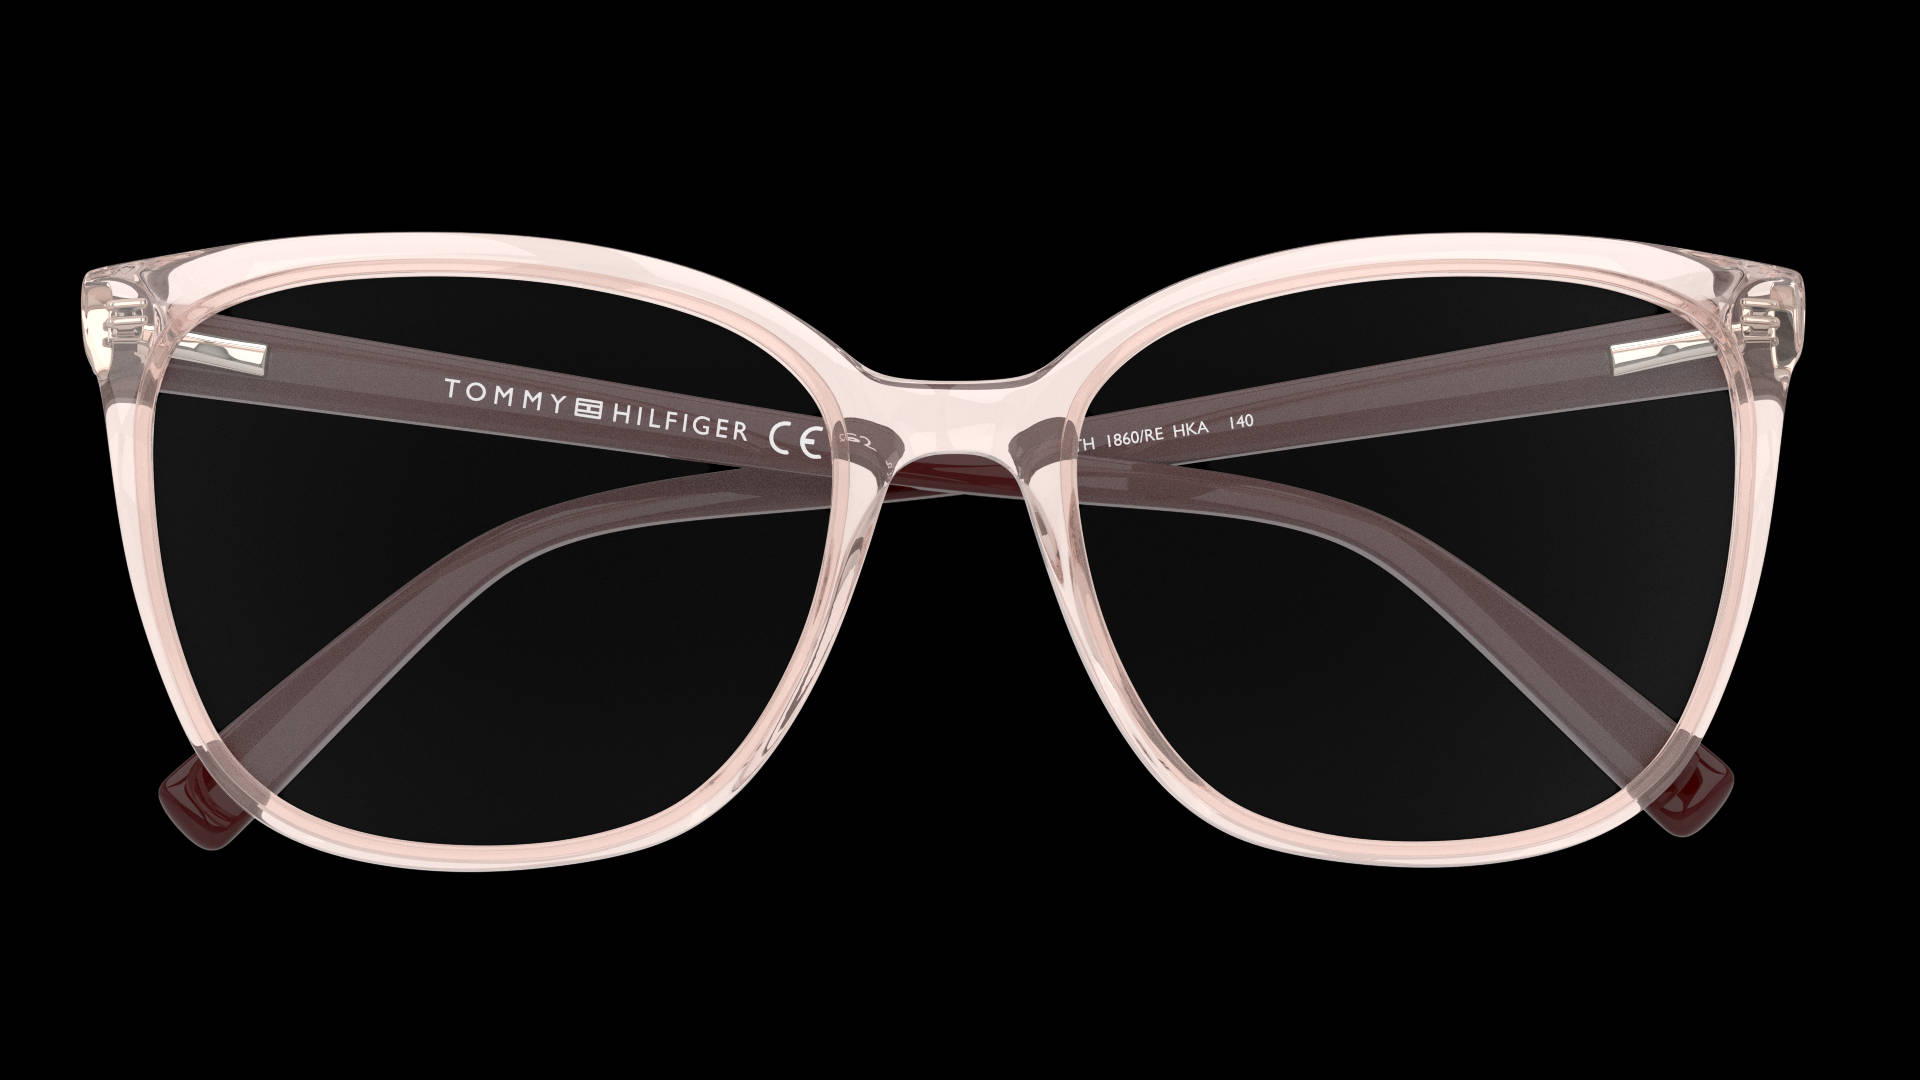 Tommy Hilfiger Bio-based Th 1860/re Women's Glasses Picture